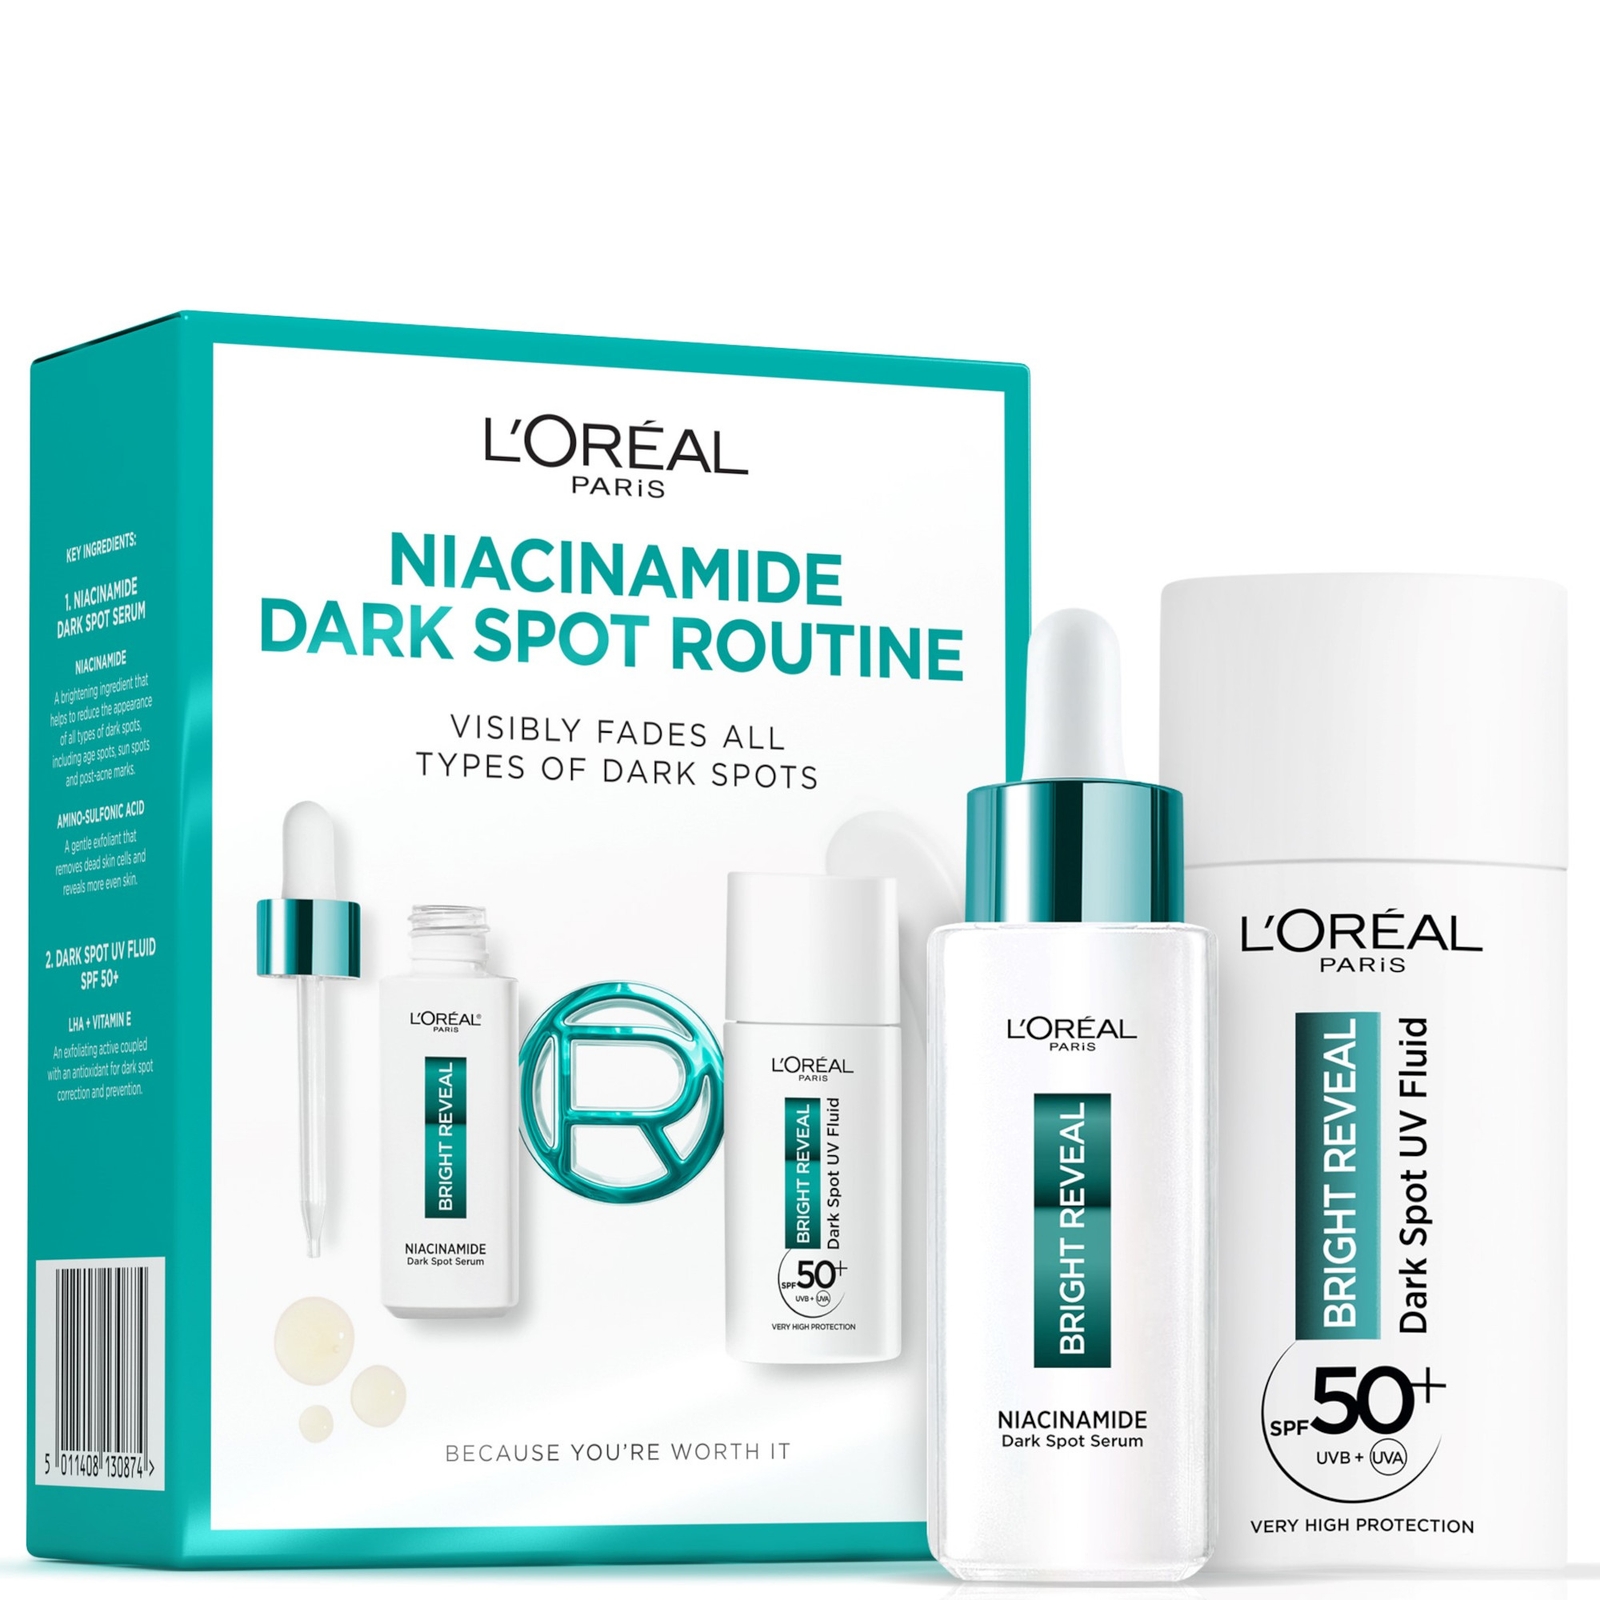 L'Oreal Paris Bright Reveal Niacinamide Dark Spot Routine with Serum and UV Fluid SPF50+ Exclusive